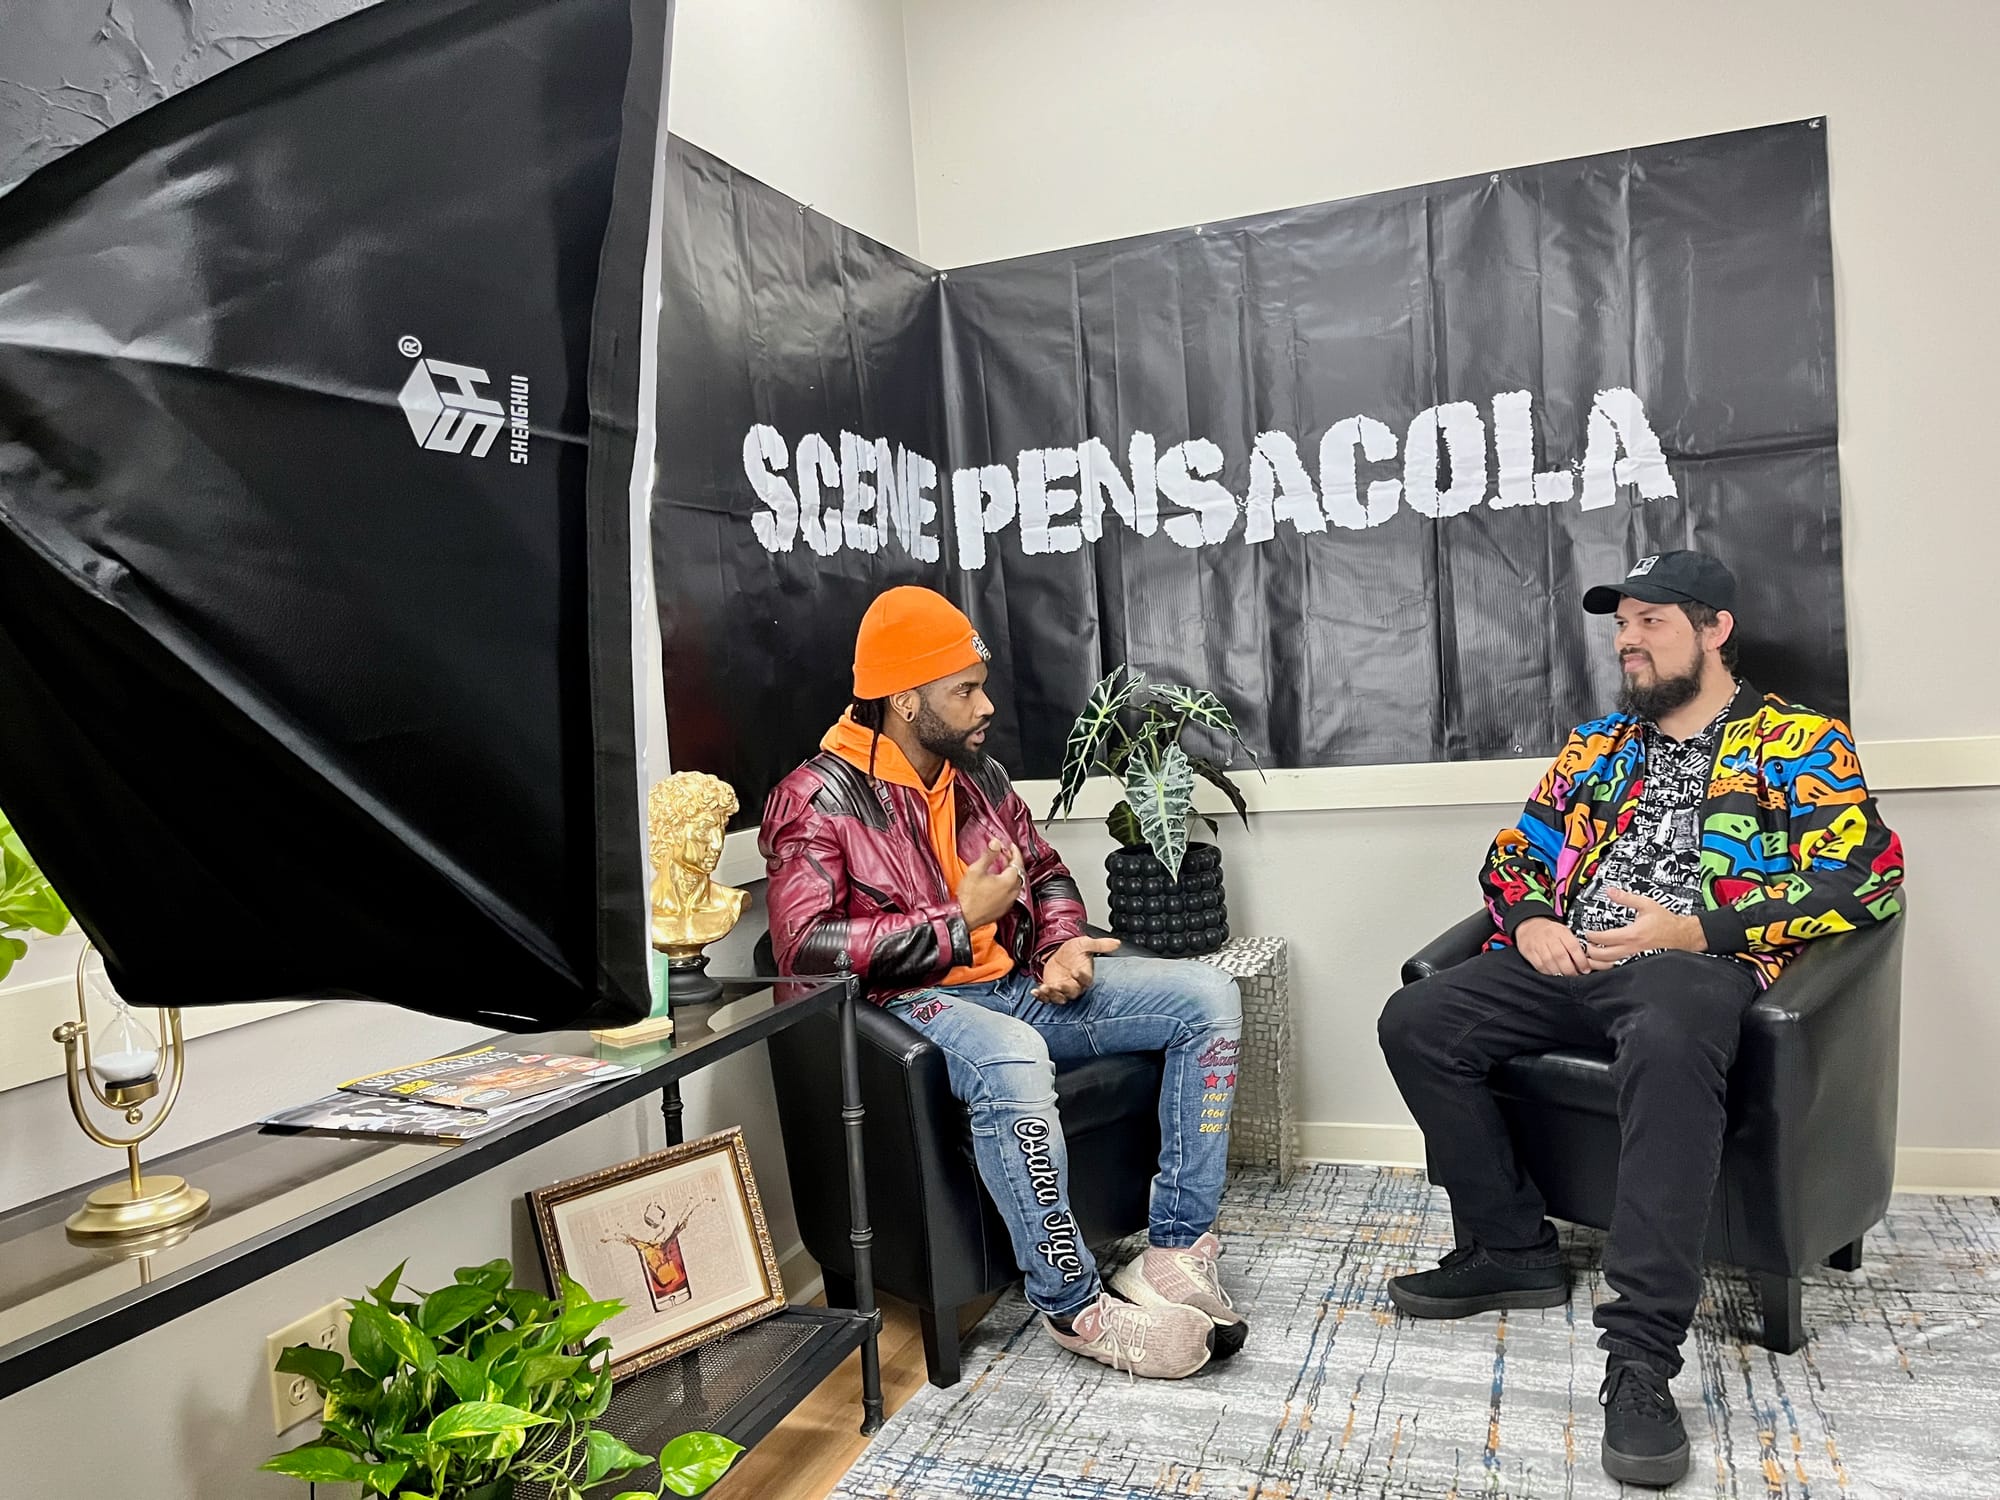 Tim Schaffer interviewing Travis from Wild Charge in the Scene Pensacola studio.